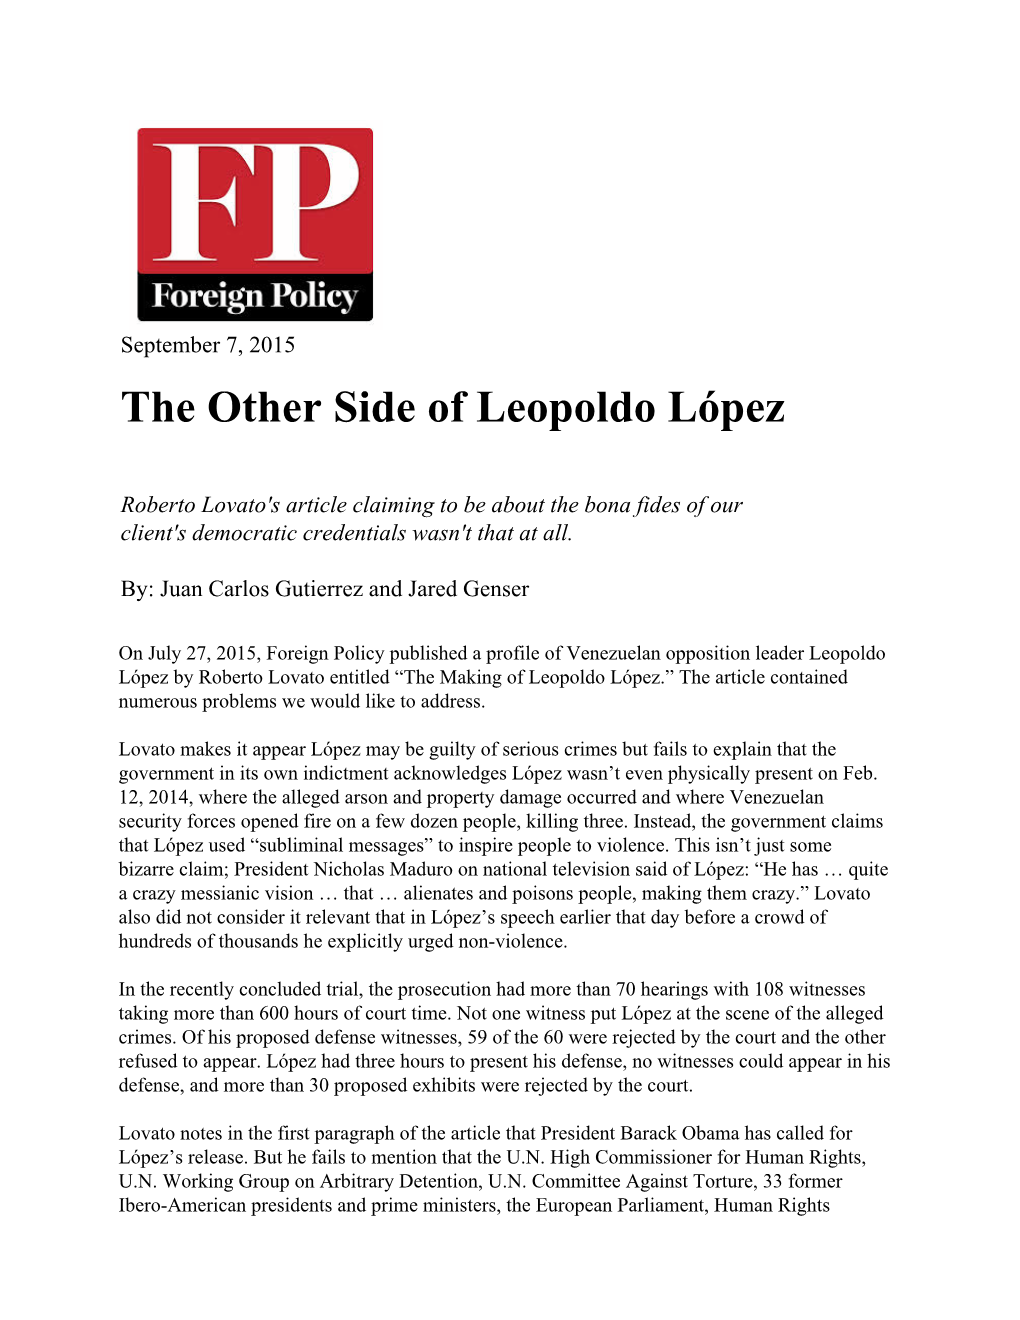 The Other Side of Leopoldo López